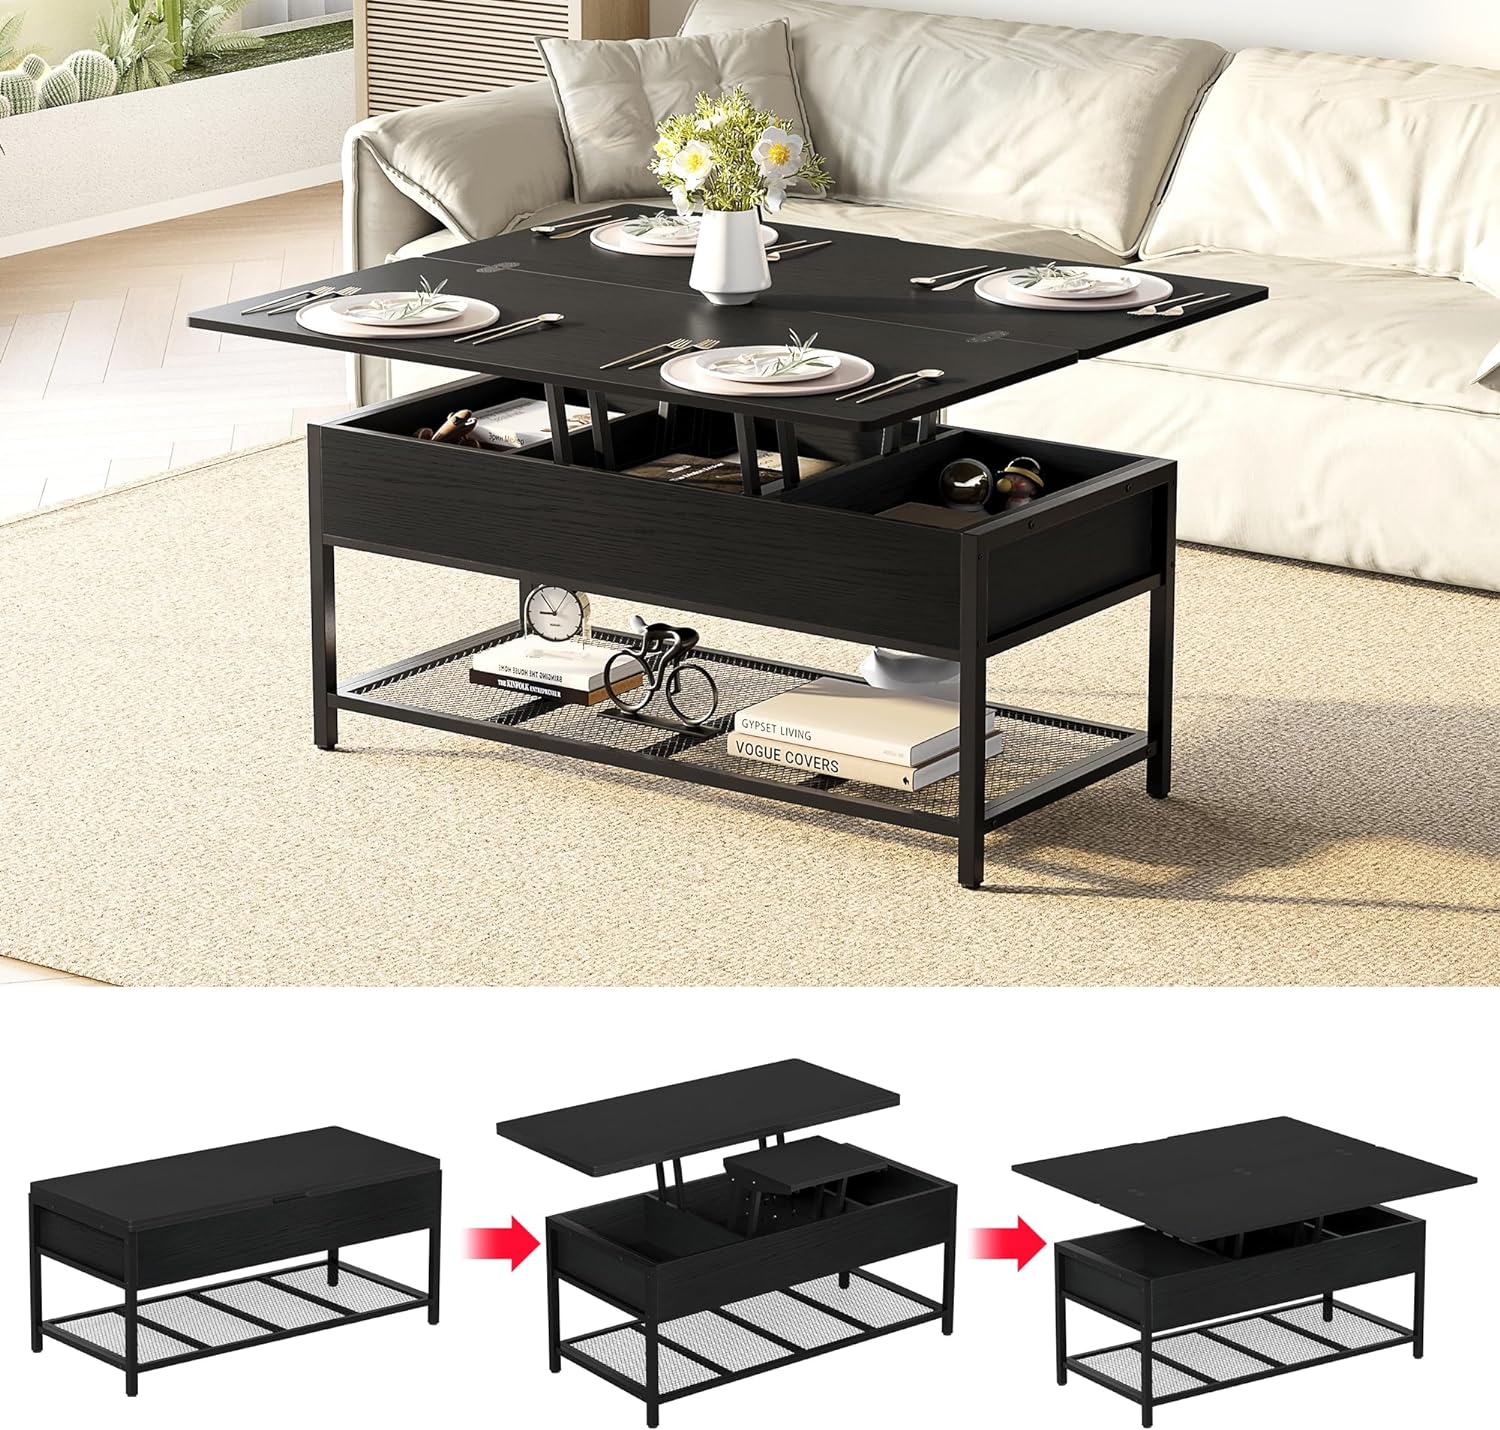 HOME BI 43 Lift Top Coffee Tables for Living Room, Coffee Table with Lifting Top 3 in 1 Multi-Function Coffee Table converts to Dining Table Coffee Table with Storage (Black, 43 inch)